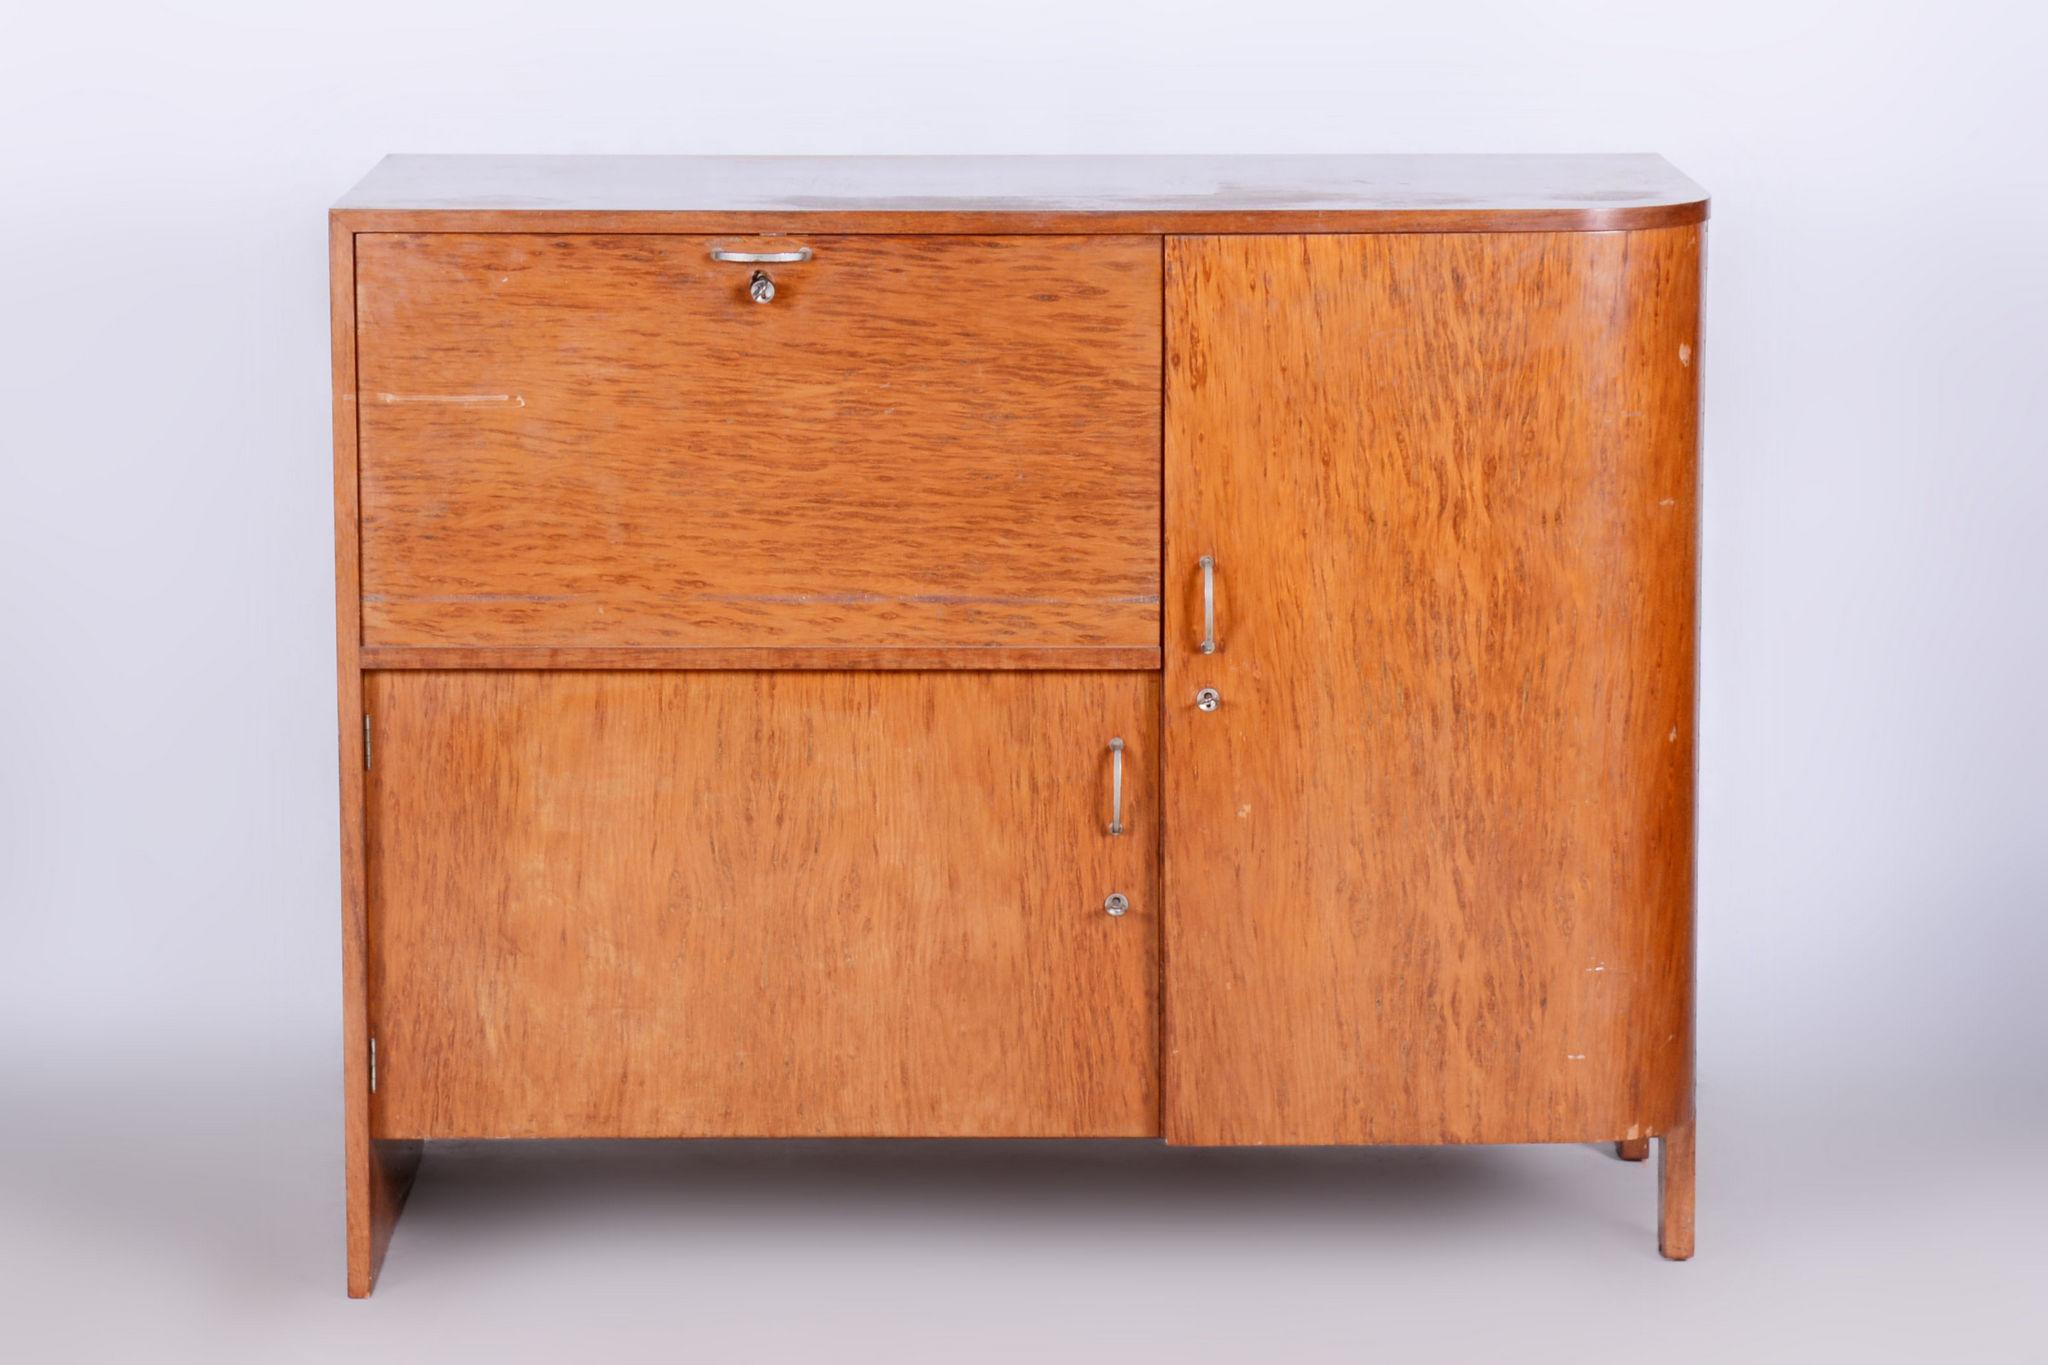 French Art Deco sideboard.
Material: Palisander
Period: 1920-1929

It has been re-polished with polyutherane piano lacquer by our professional refurbishing team in Czechia according to the original process.								

Our professional refurbishing